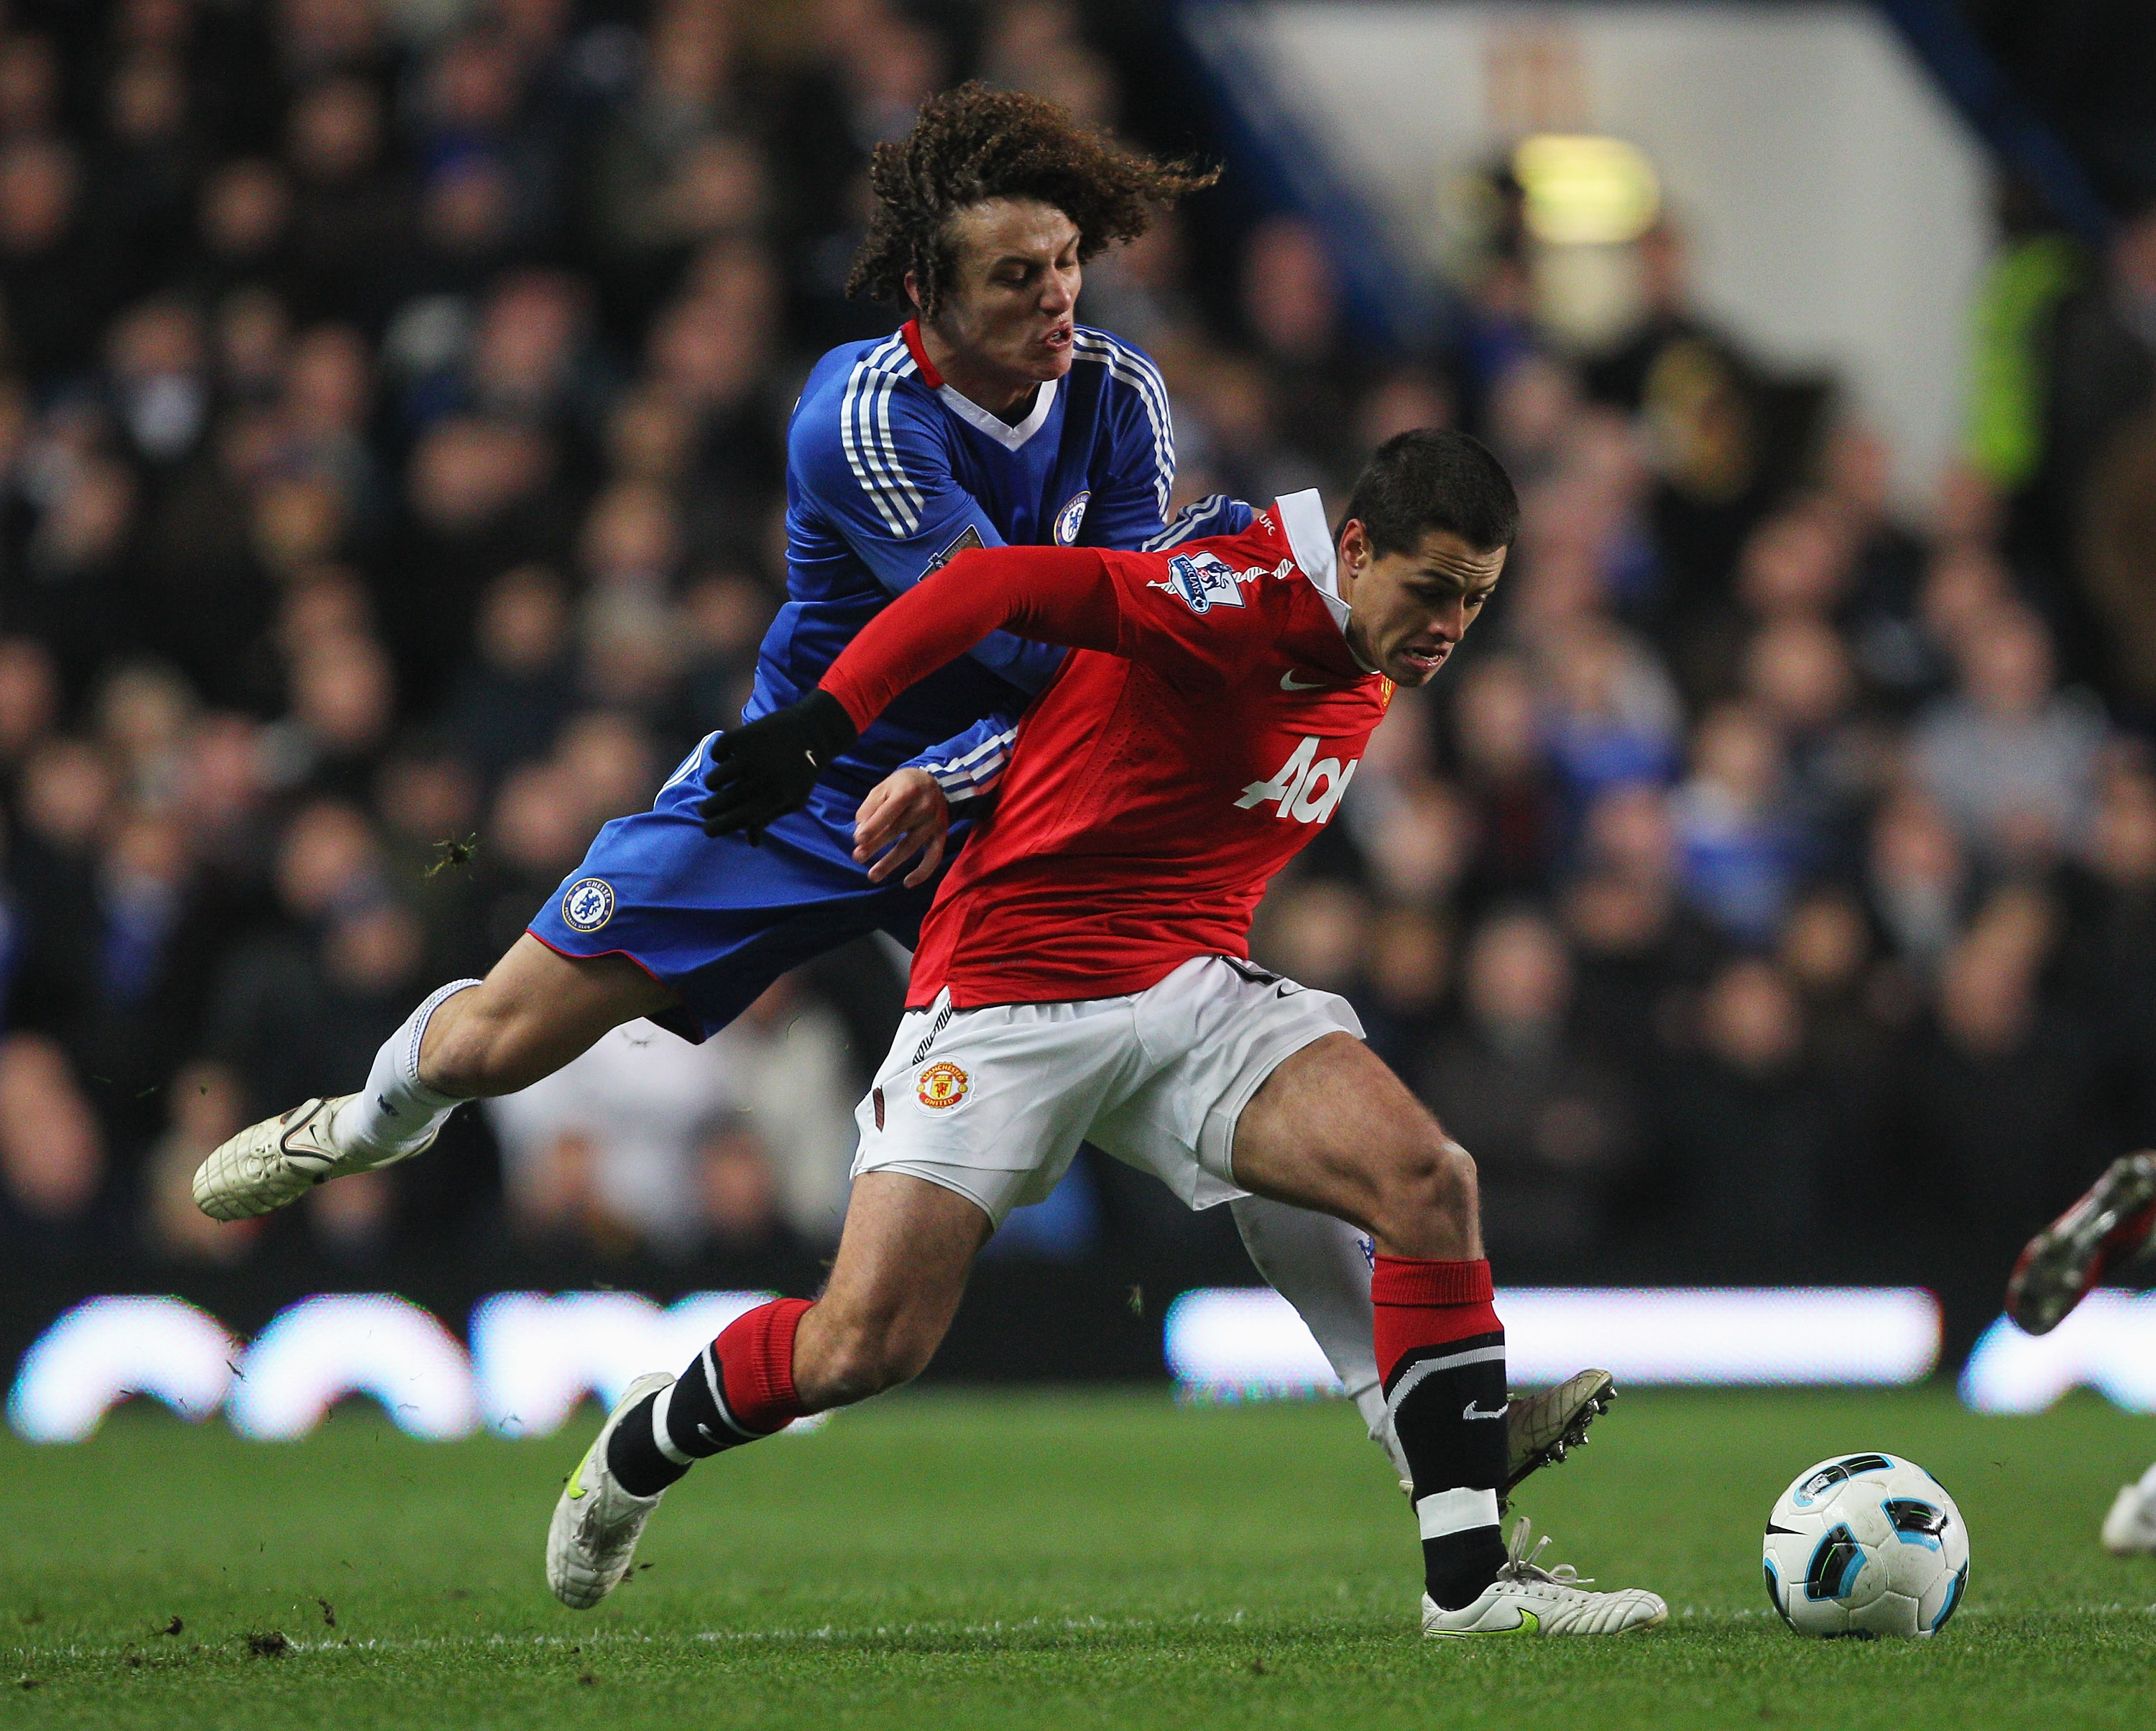 LONDON, ENGLAND - MARCH 01:  David Luiz of Chelsea challenges Javier Hernandez of Manchester United during the Barclays Premier League match between Chelsea and Manchester United at Stamford Bridge on March 1, 2011 in London, England.  (Photo by Clive Ros